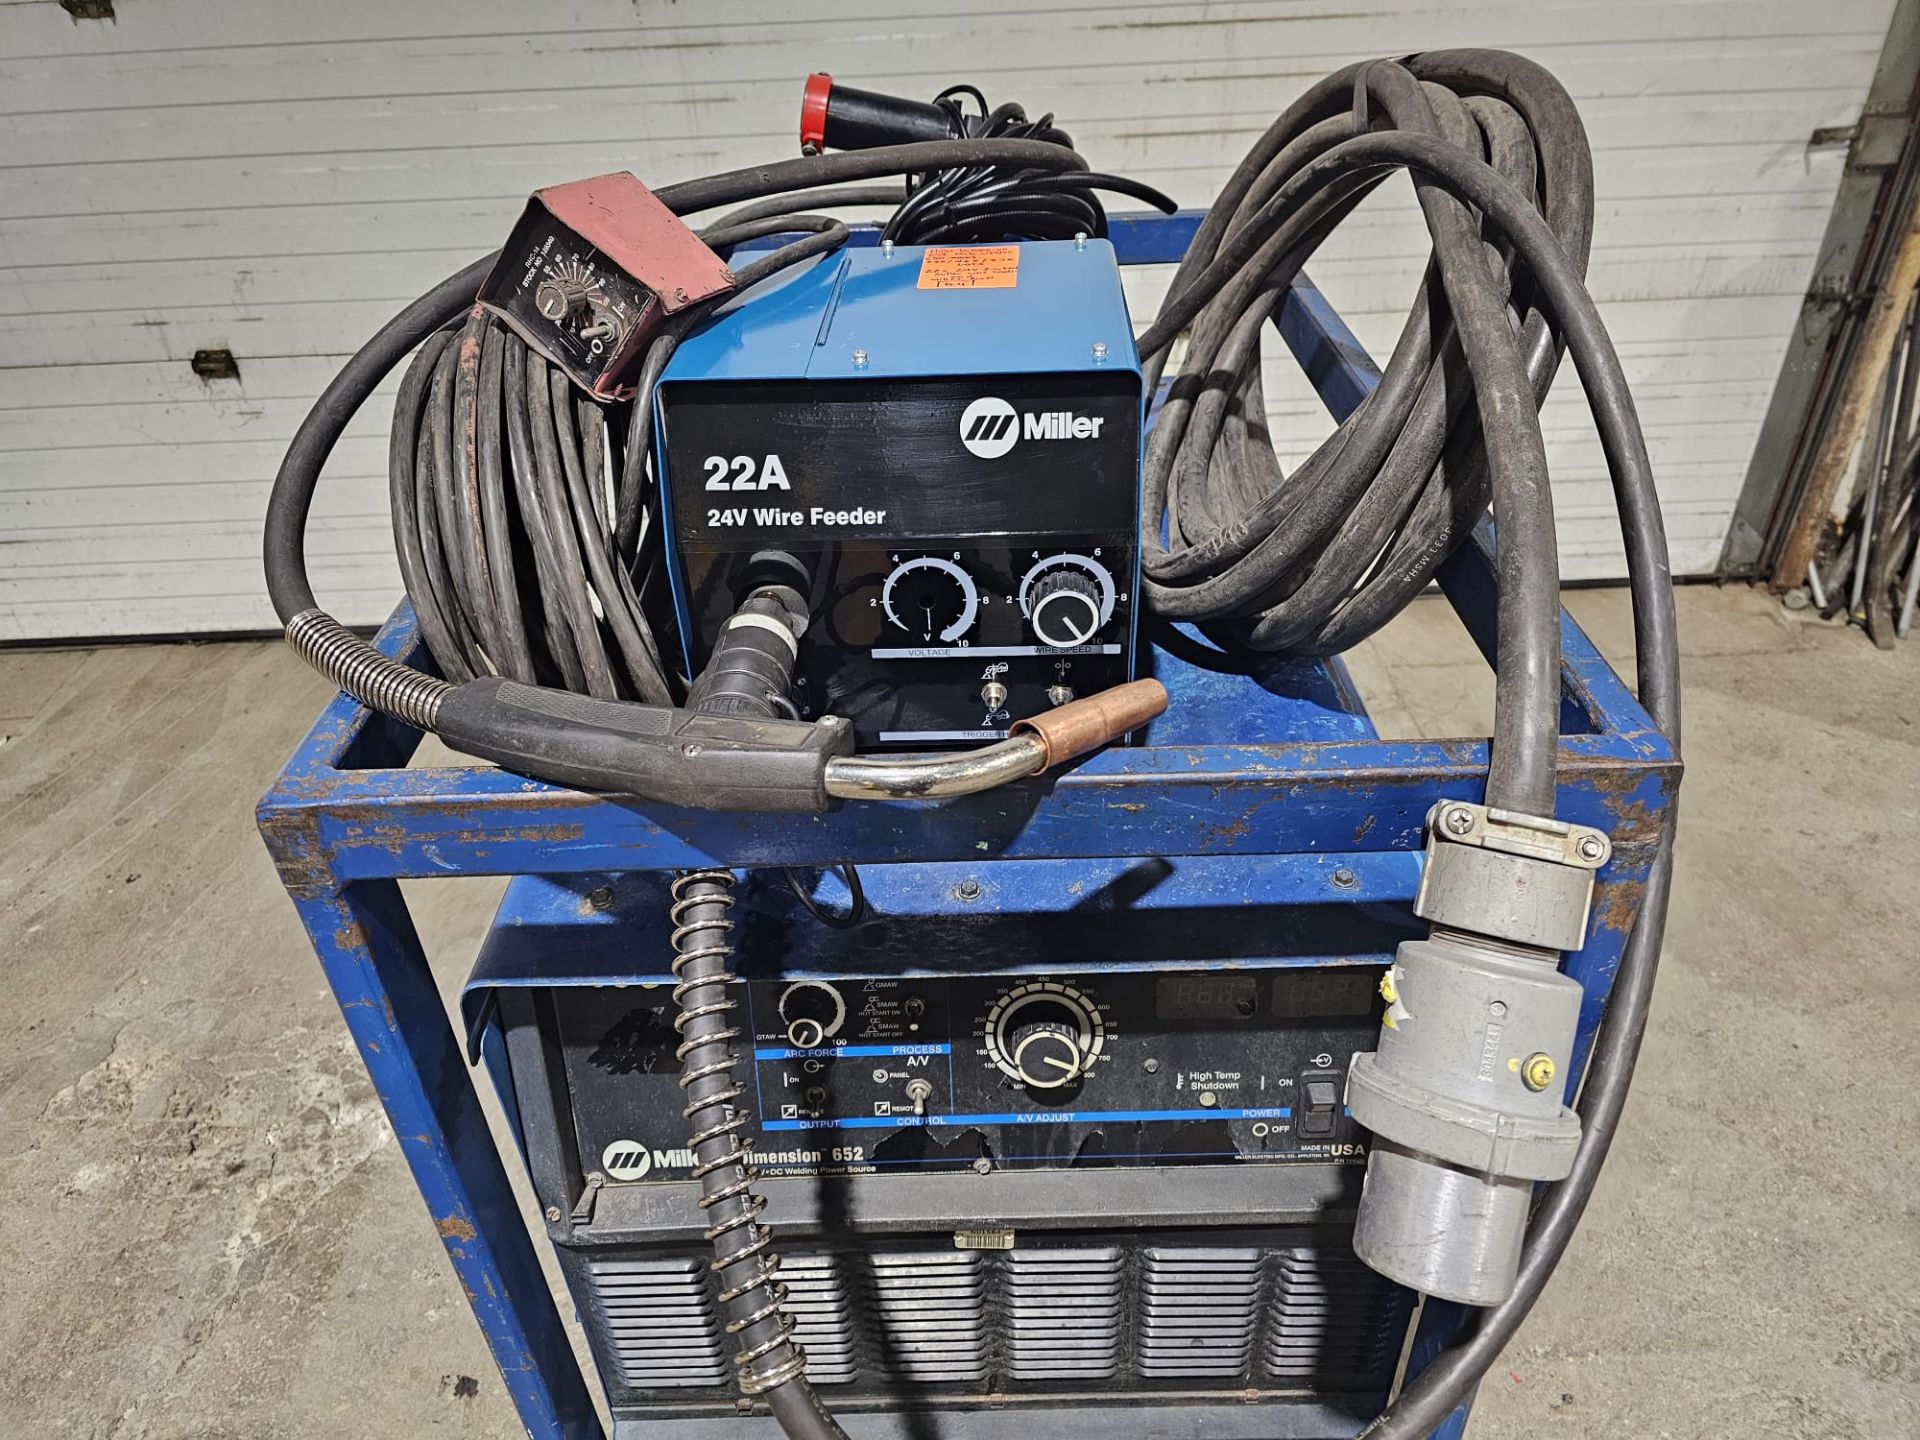 Miller Dimension 652 Mig Welder 650 Amp Mig Tig Stick Multi Process Power Source with 22A Wire - Image 9 of 10